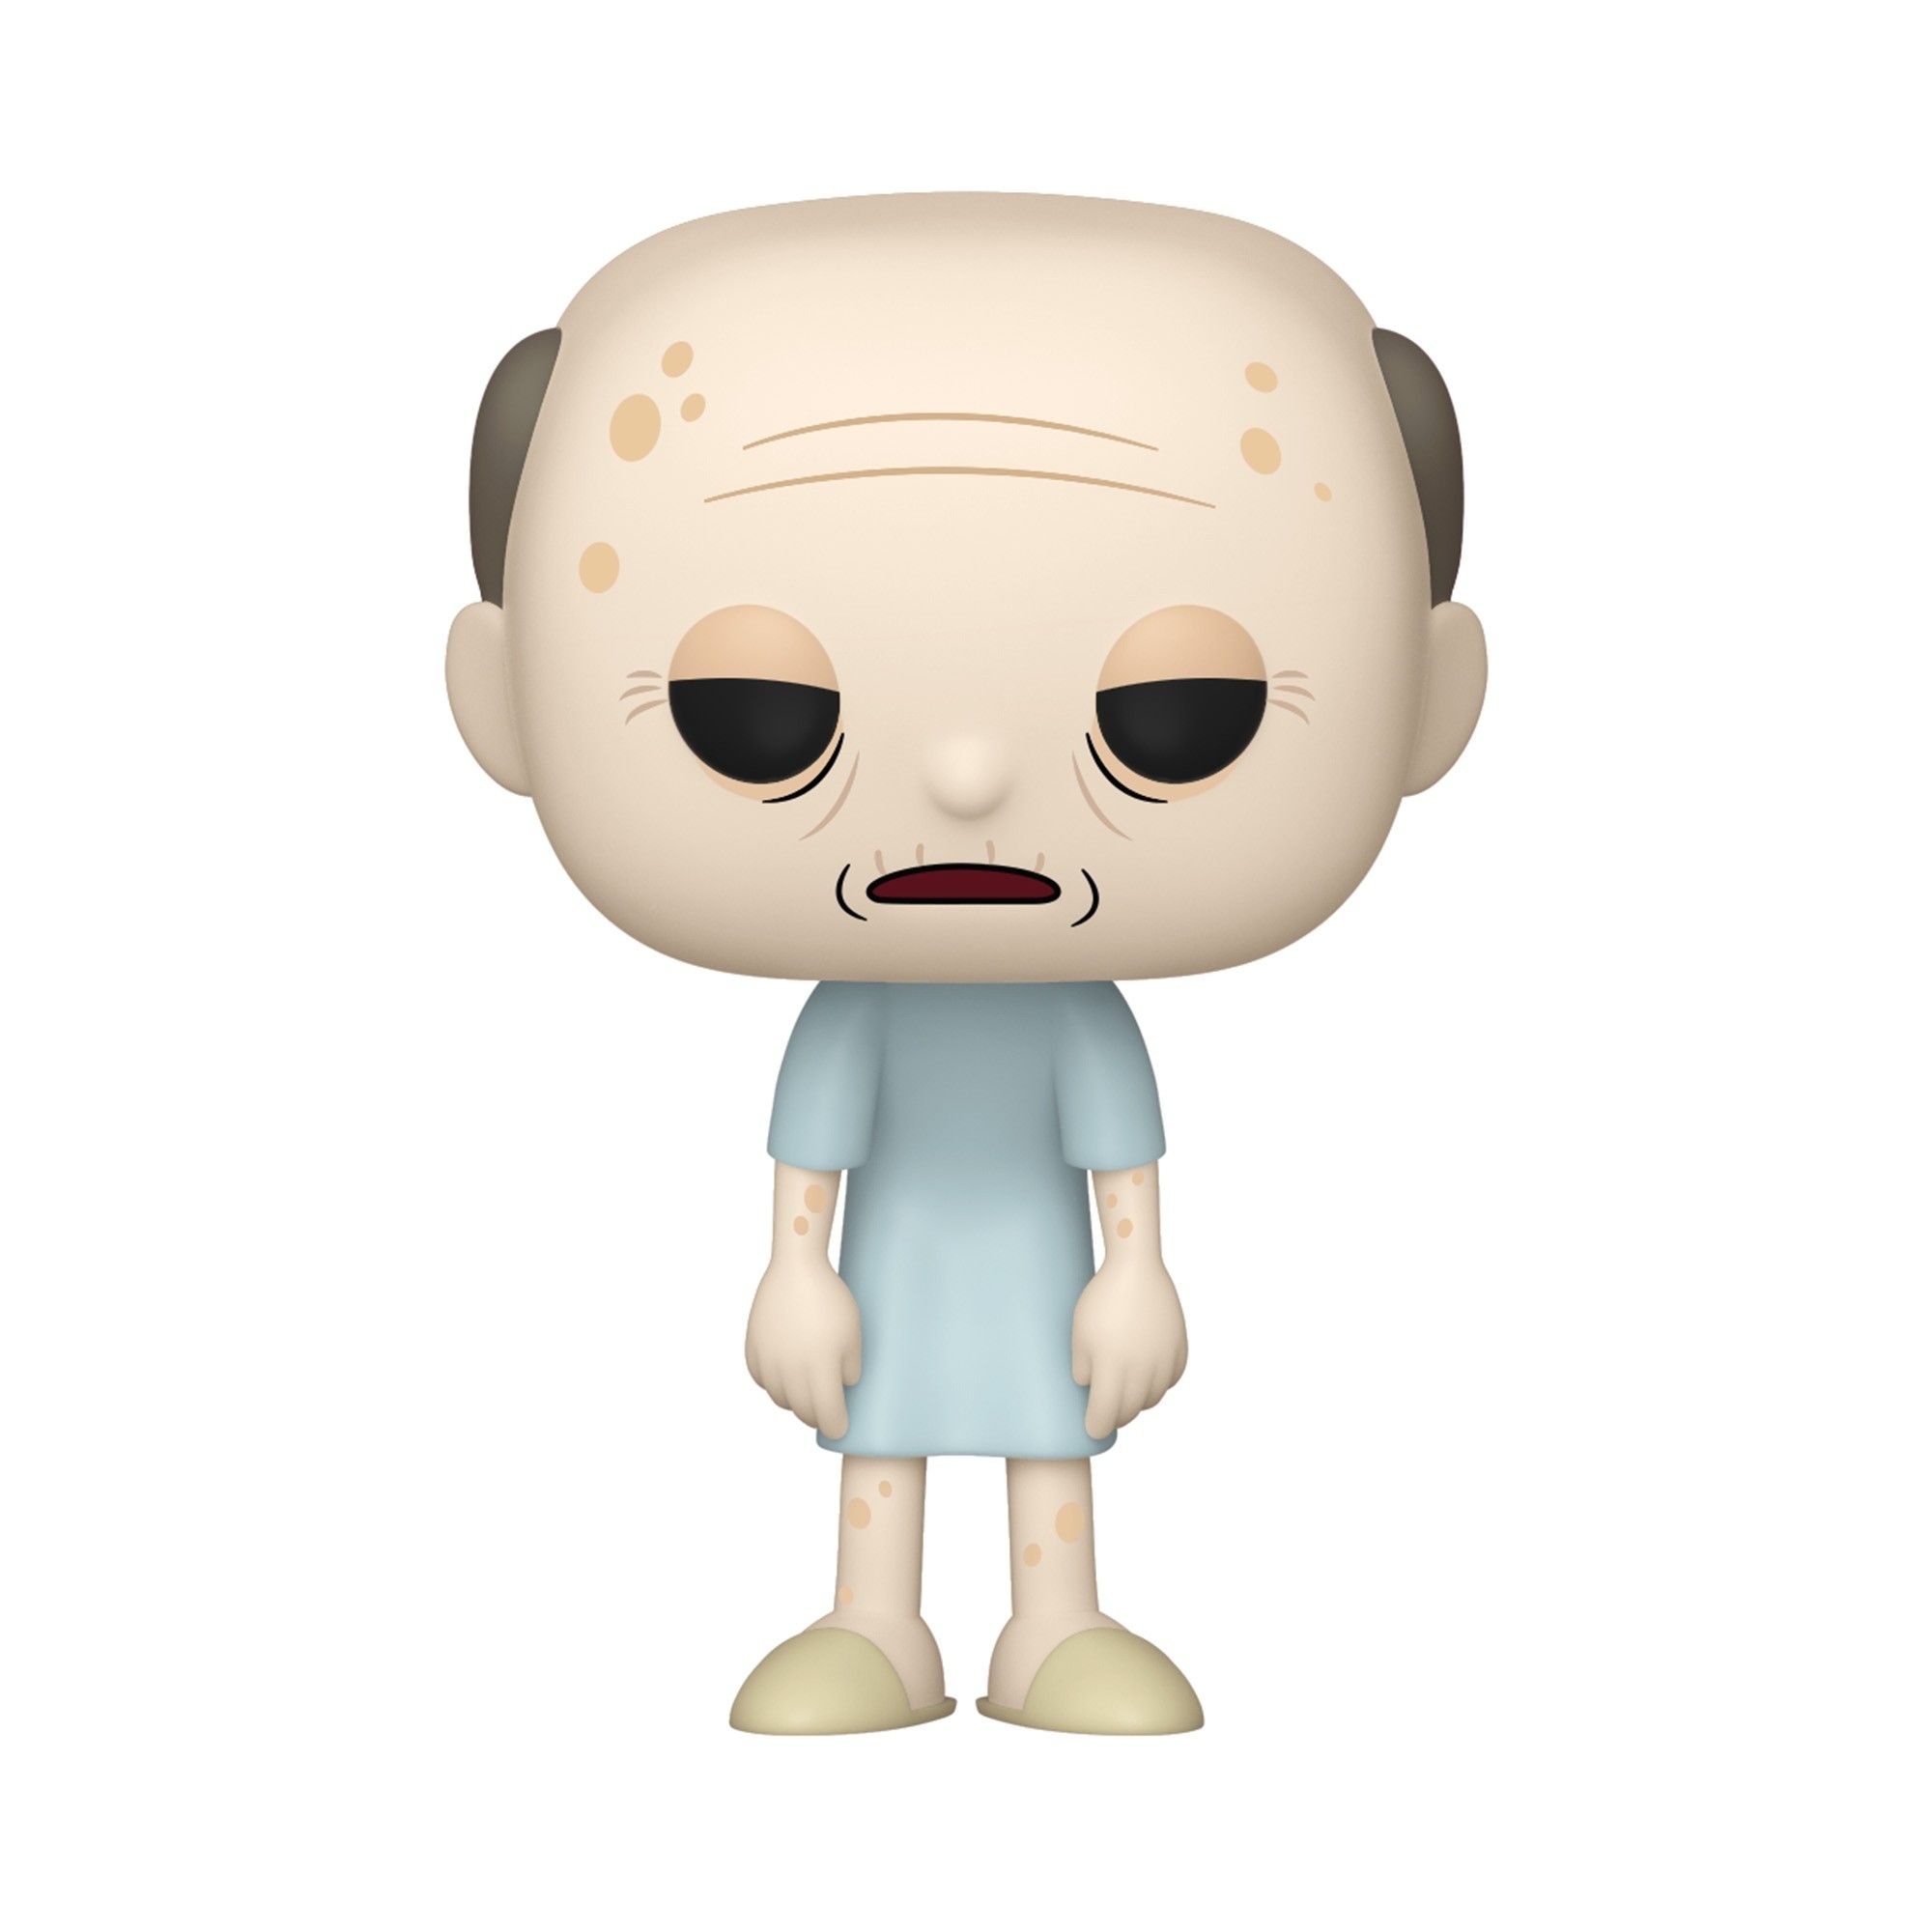 Funko Pop! Hospice Morty (Rick and Morty)